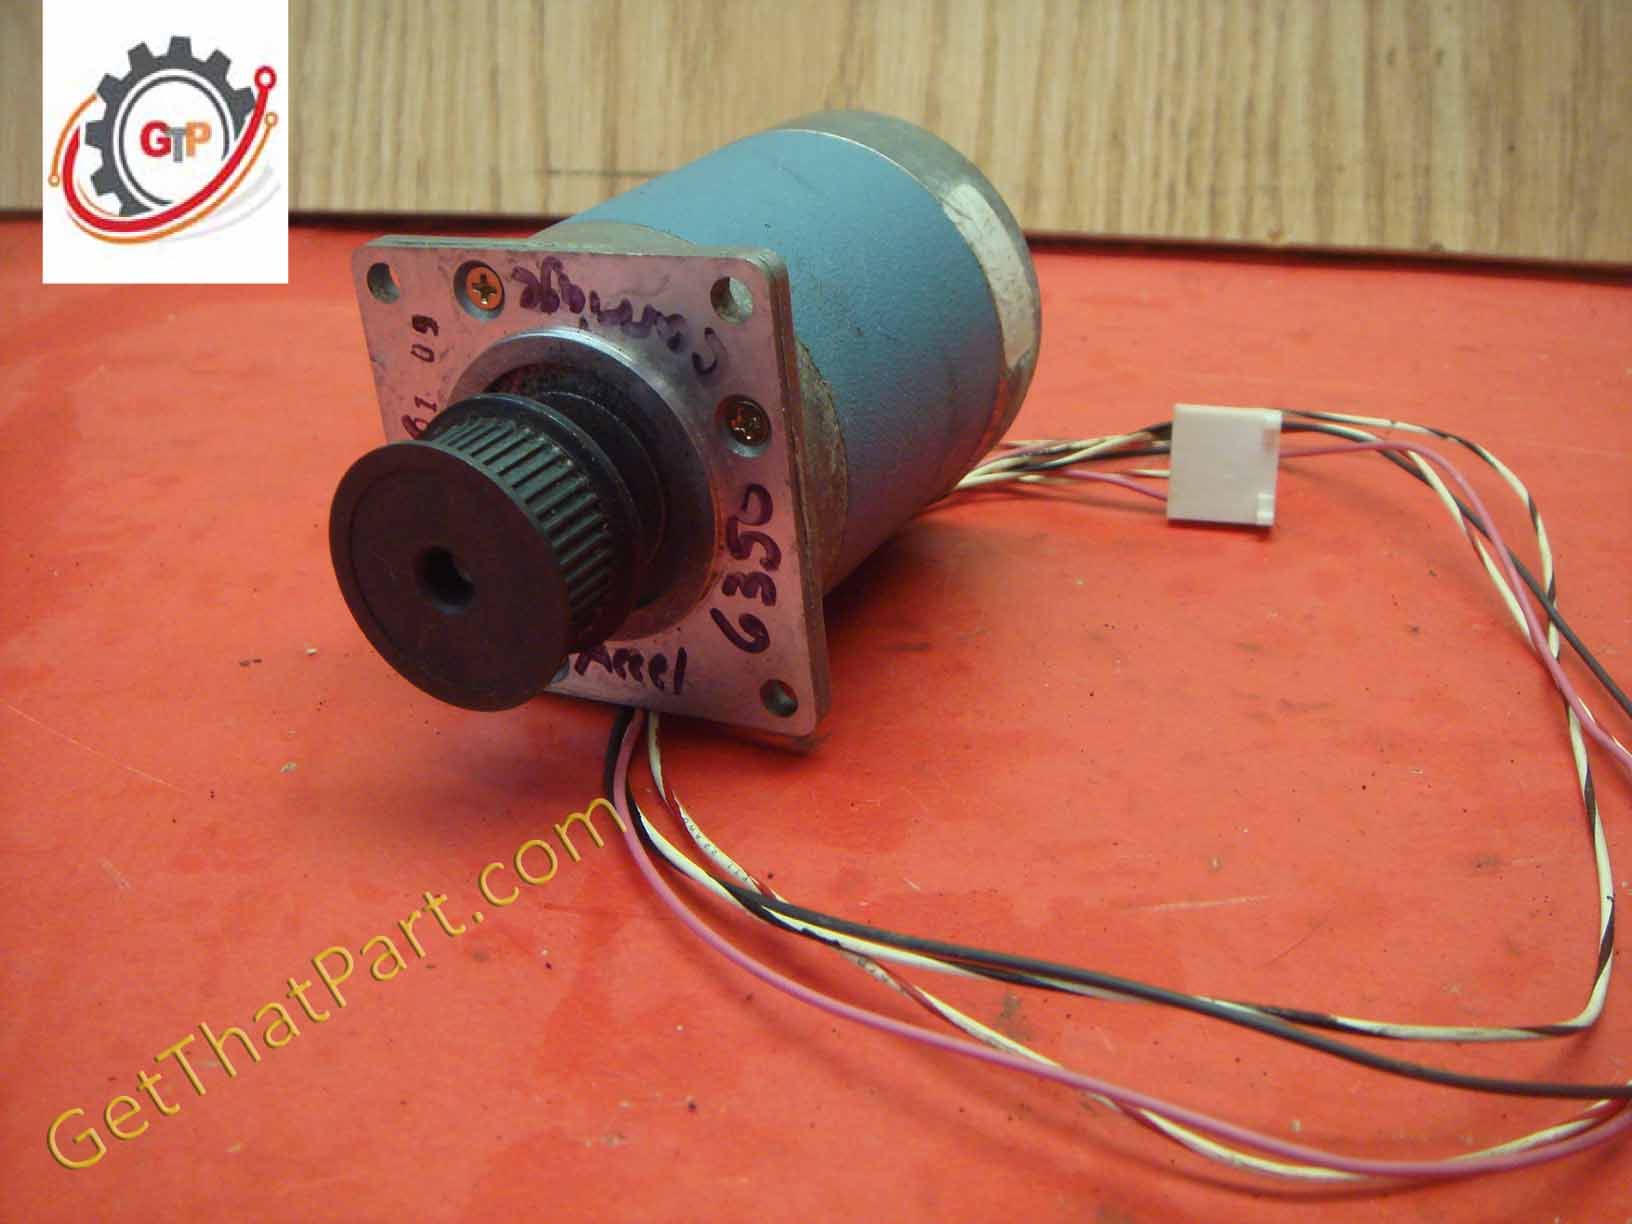 AMT Datasouth Accel 6350 Complete Carriage Main Motor Assembly